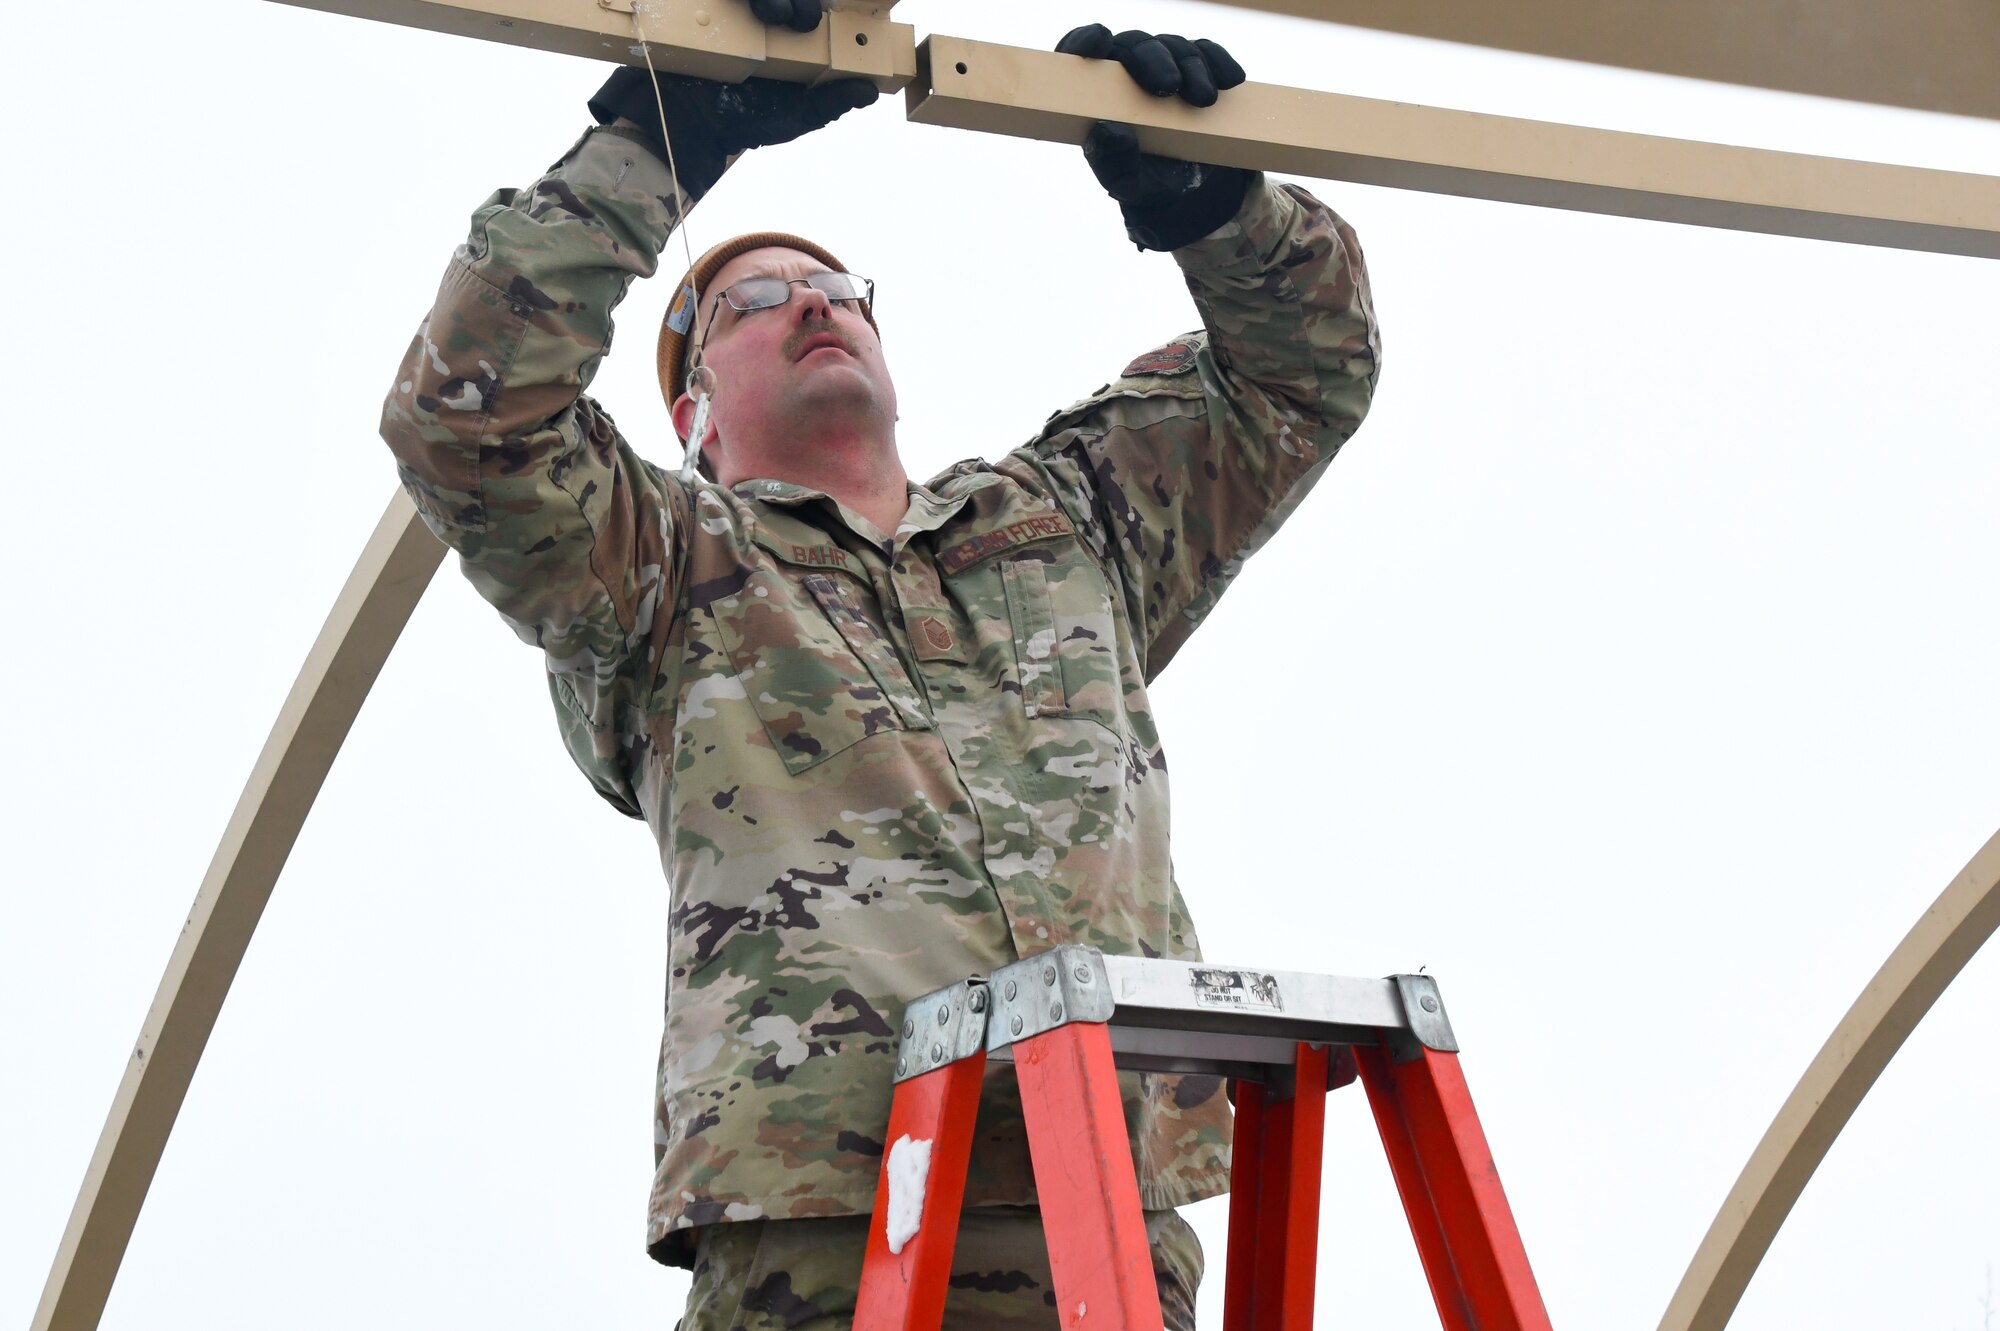 U.S. Air Force Master Sgt. Michael Bahr, Civil Engineer Operations Manager, 168th Civil Engineer Squadron, attaches a beam while configuring a tent set up with a team of Airmen during agile combat employment training at Fort Greely Donnelly Training area.